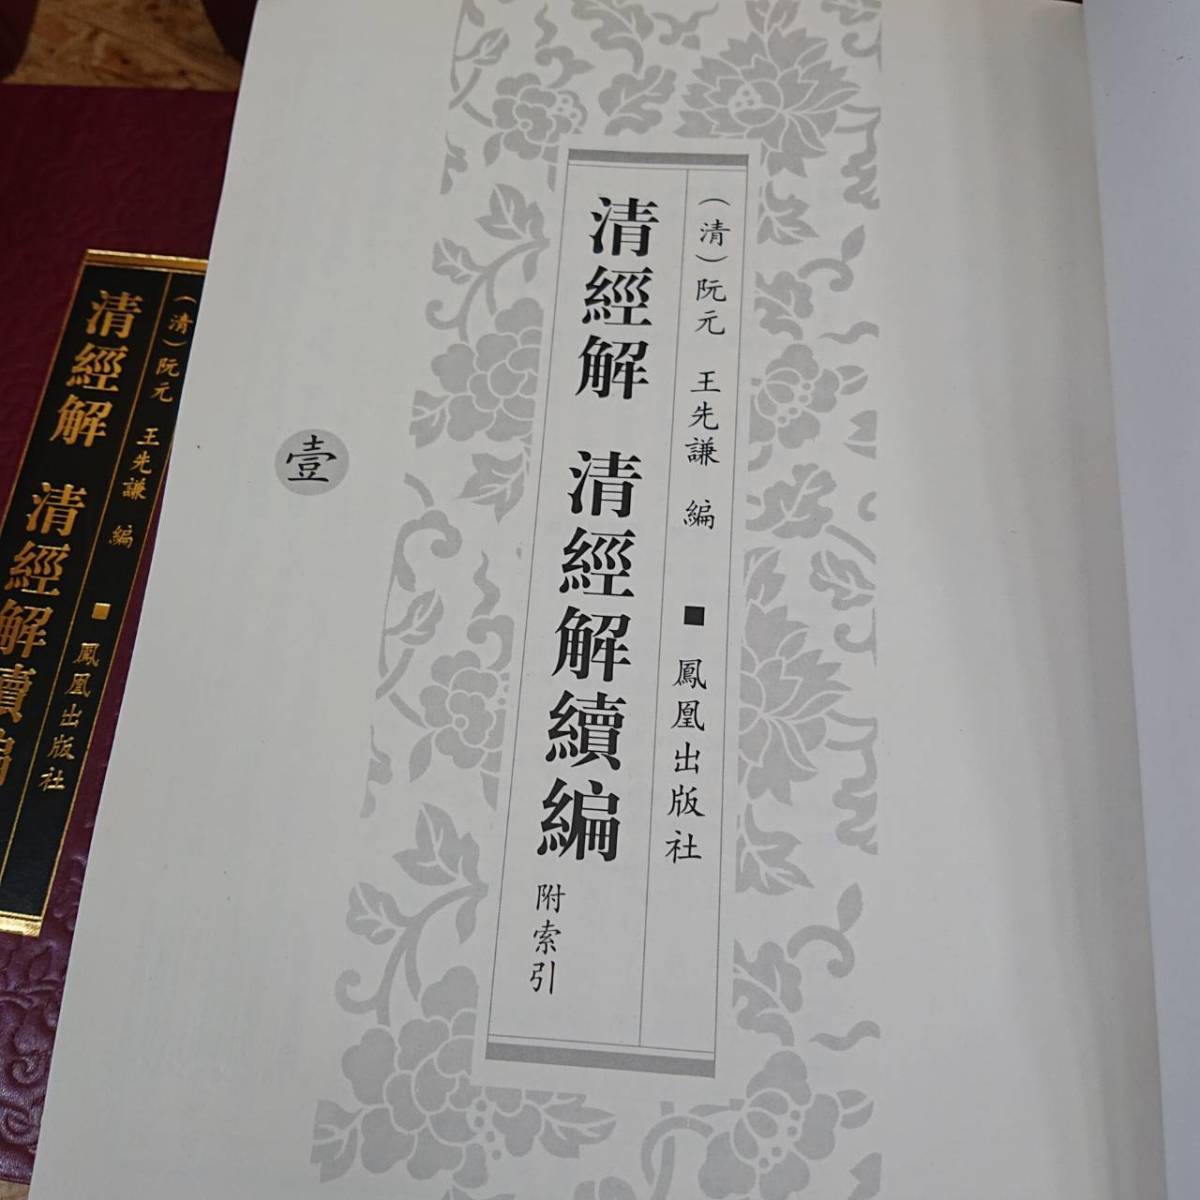  hard-to-find valuable history culture secondhand book ... compilation [ Kiyoshi ... compilation ] phoenix publish company materials museum old document China fine art history old book 